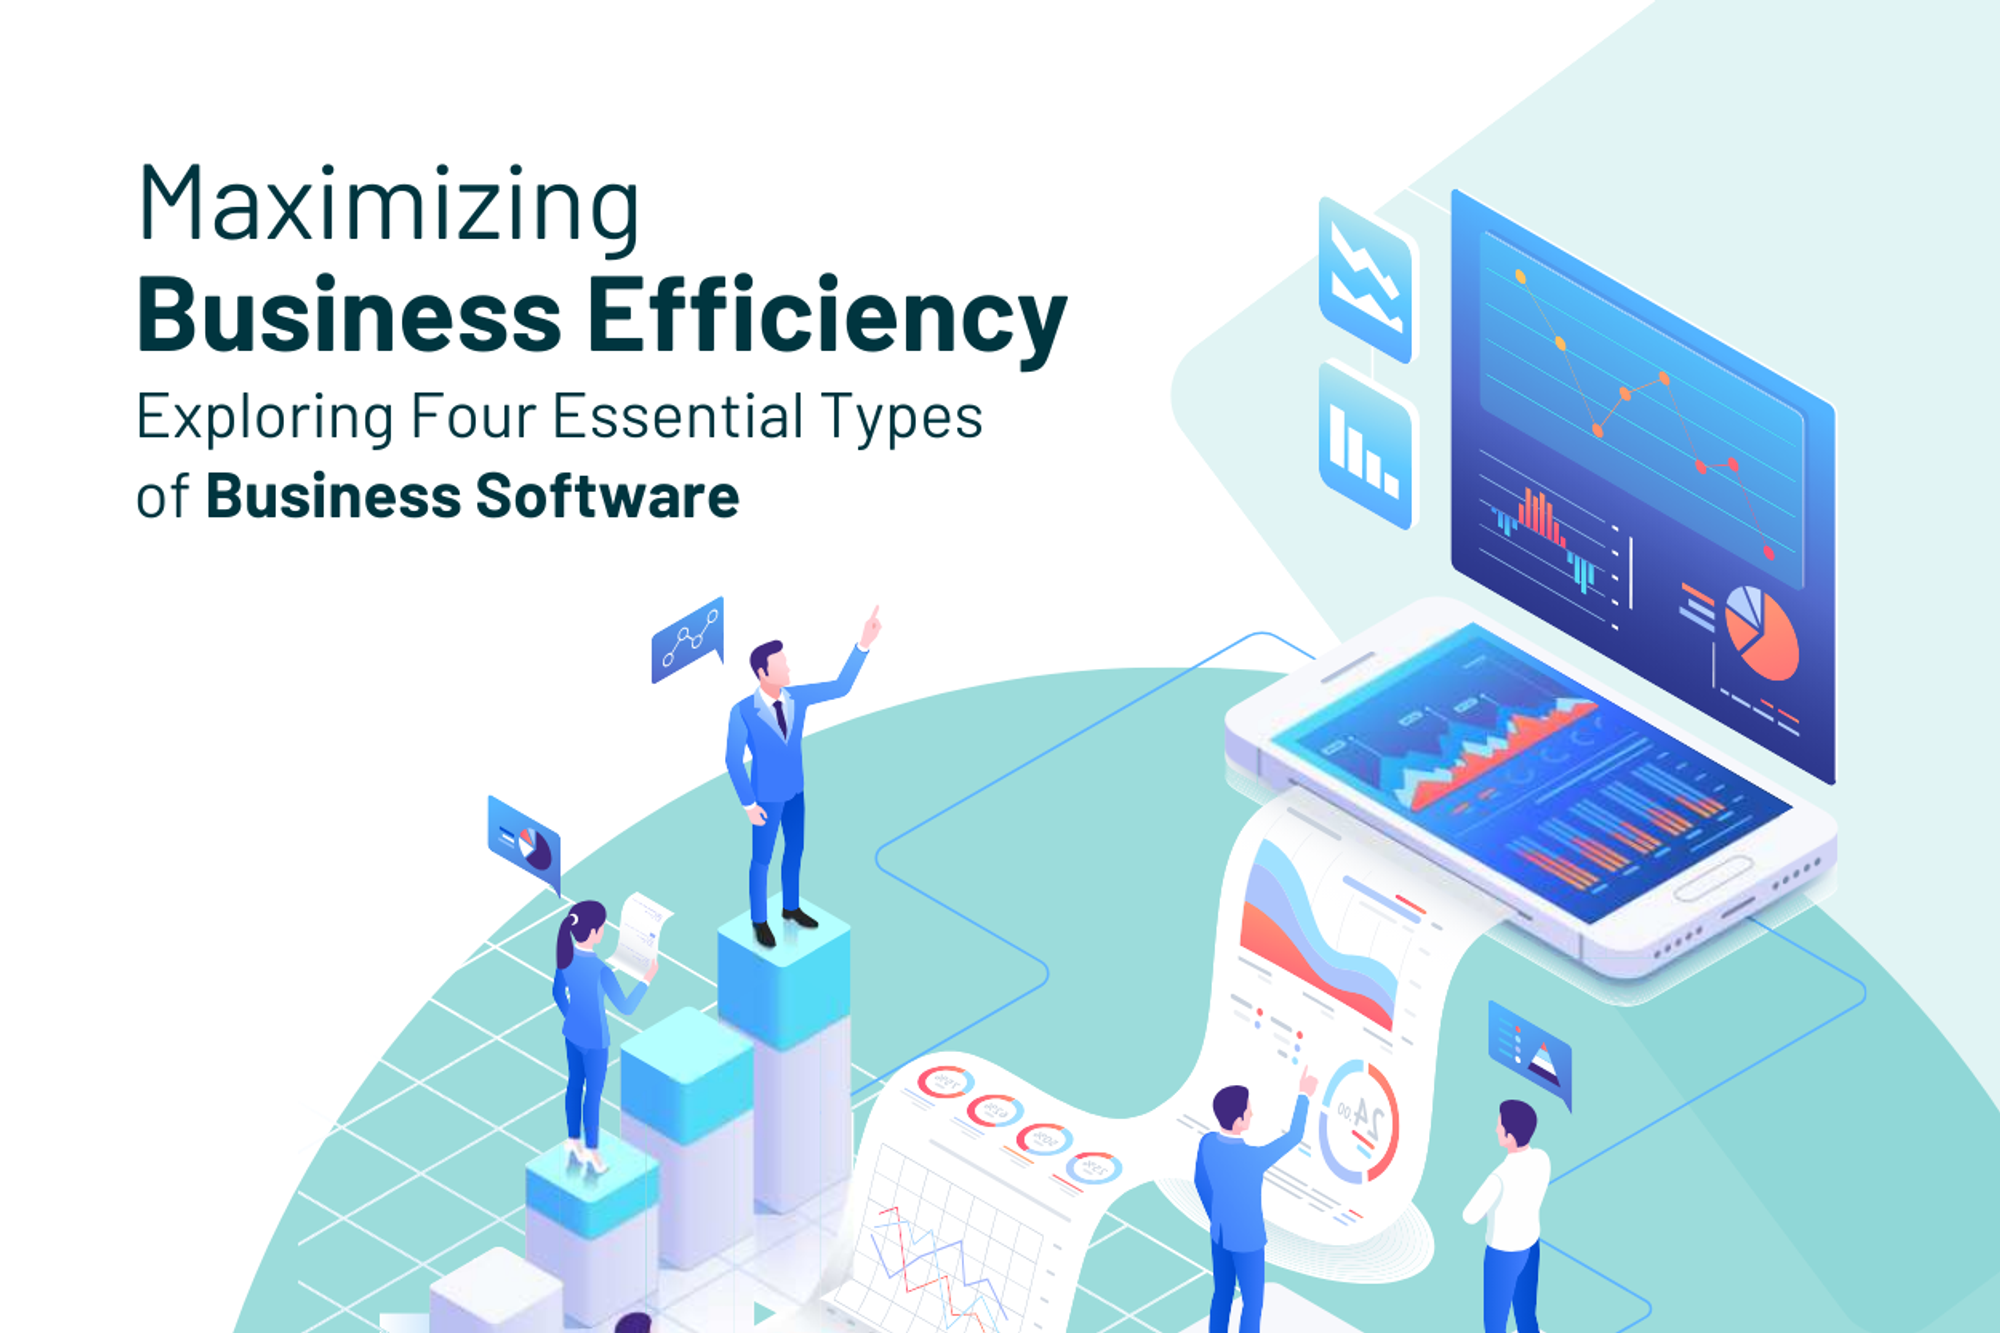 Maximizing Business Efficiency: Exploring Four Essential Types of Business Software